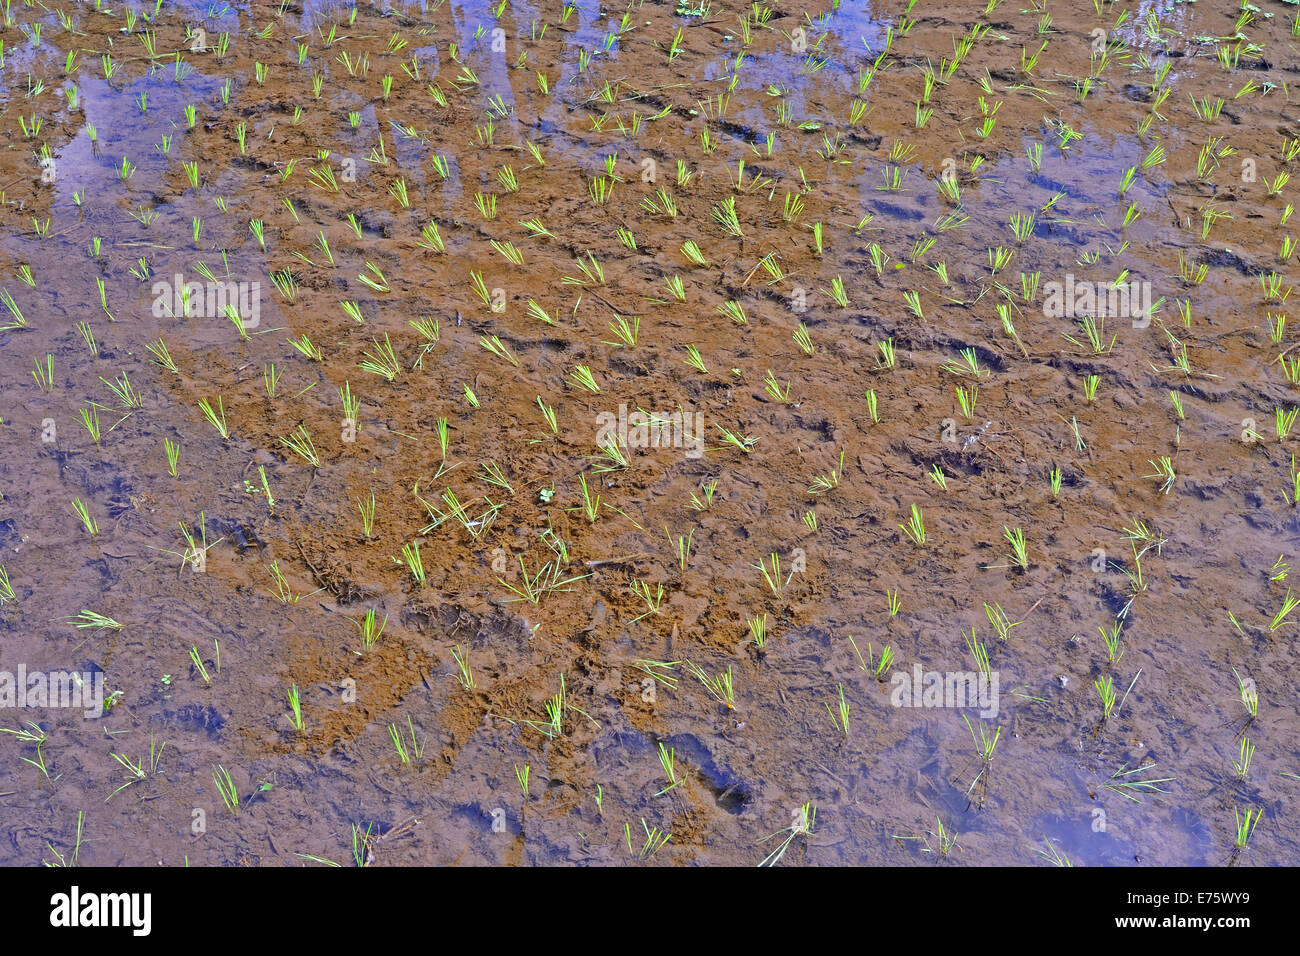 Paddy field, freshly planted rice plants, Bali, Indonesia Stock Photo